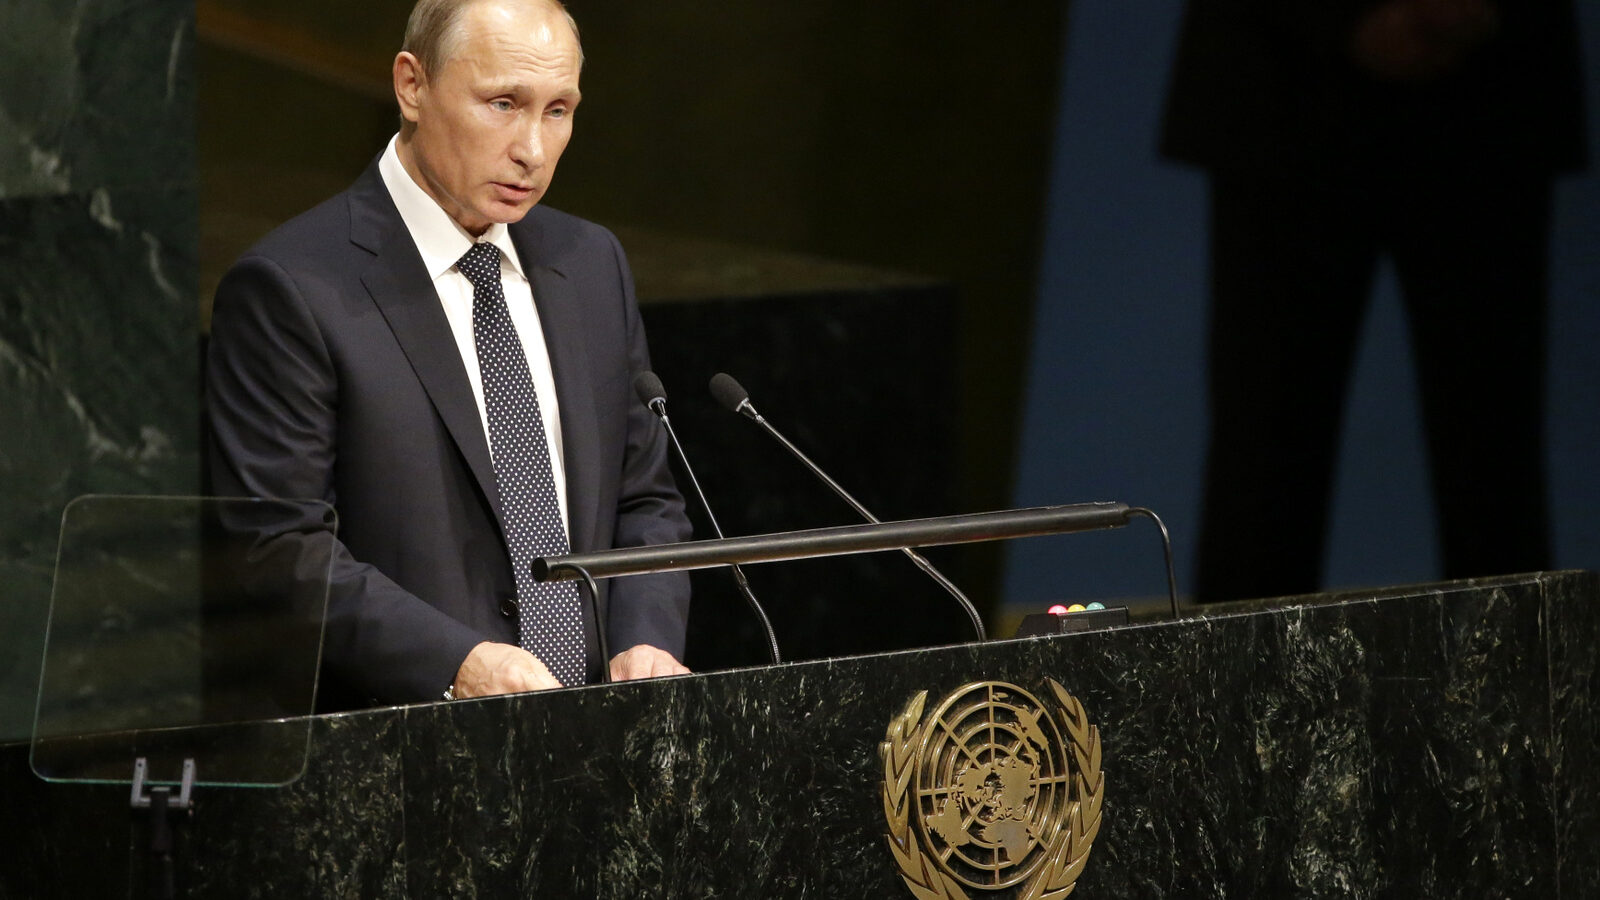 Russian President President Vladimir Putin addresses the 70th session of the United Nations General Assembly at U.N. headquarters, Monday, Sept. 28, 2015. (AP Photo/Mary Altaffer)